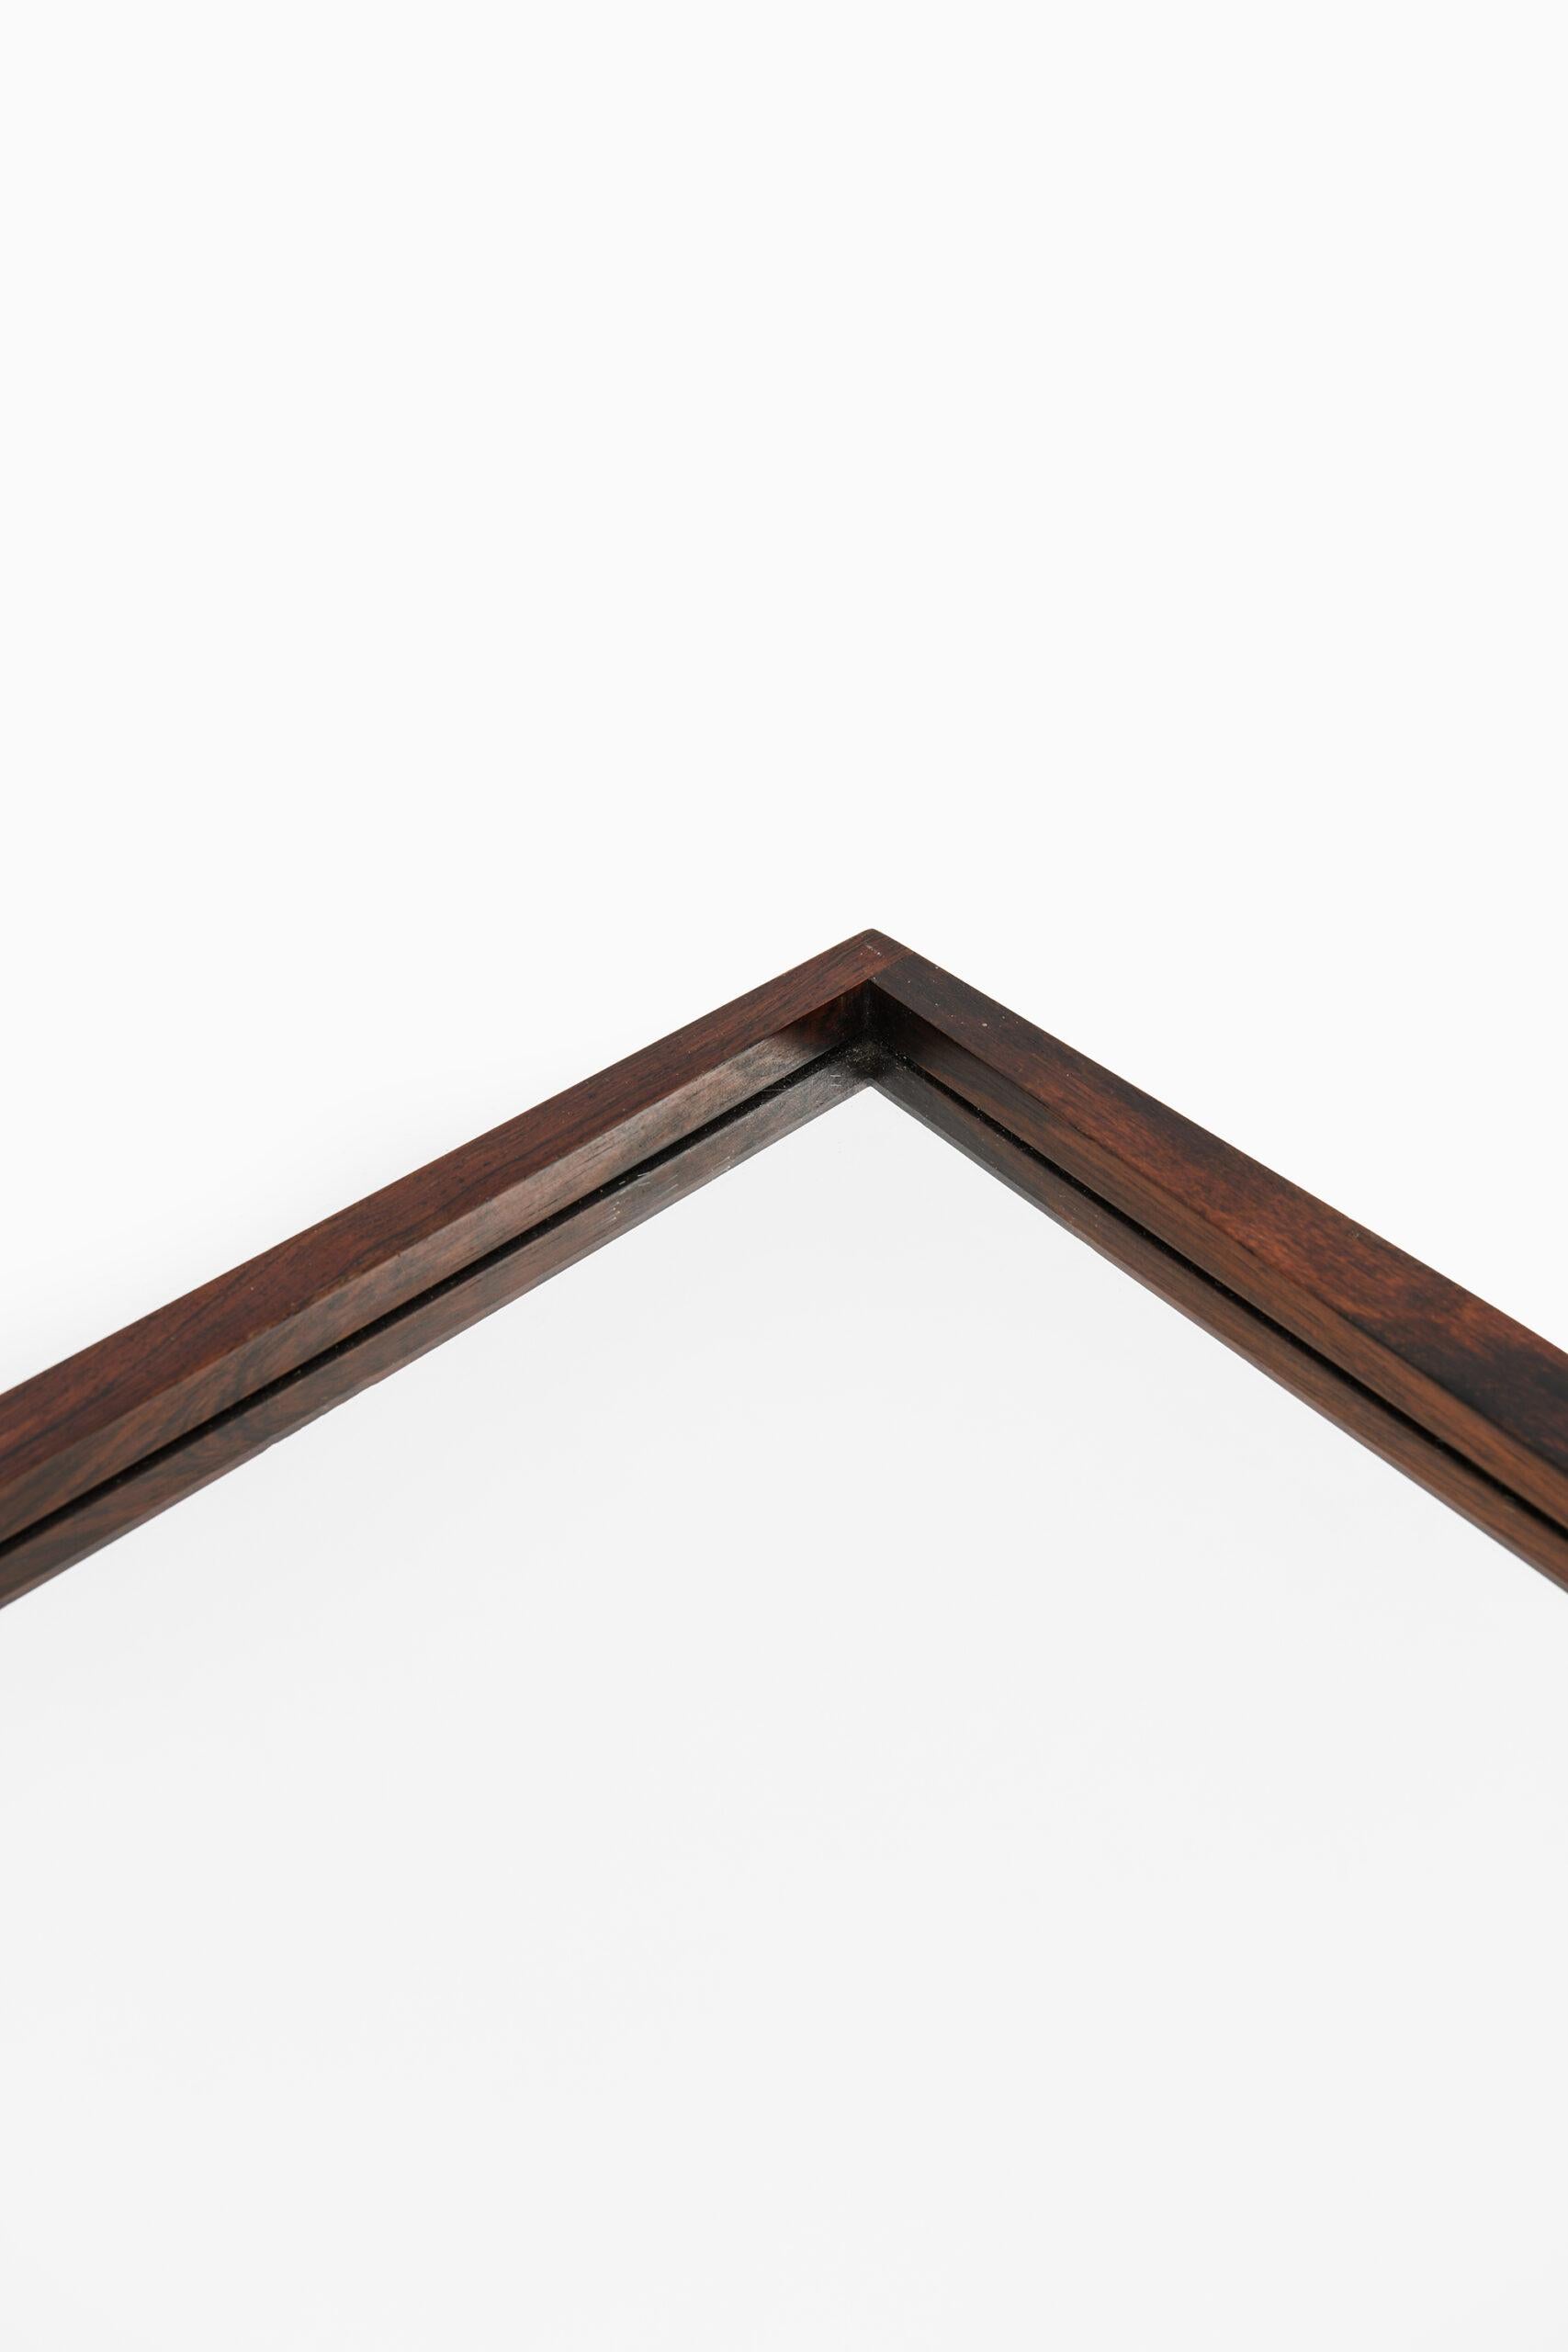 Mirror in rosewood by unknown designer. Produced by Jansen Spejle in Denmark.